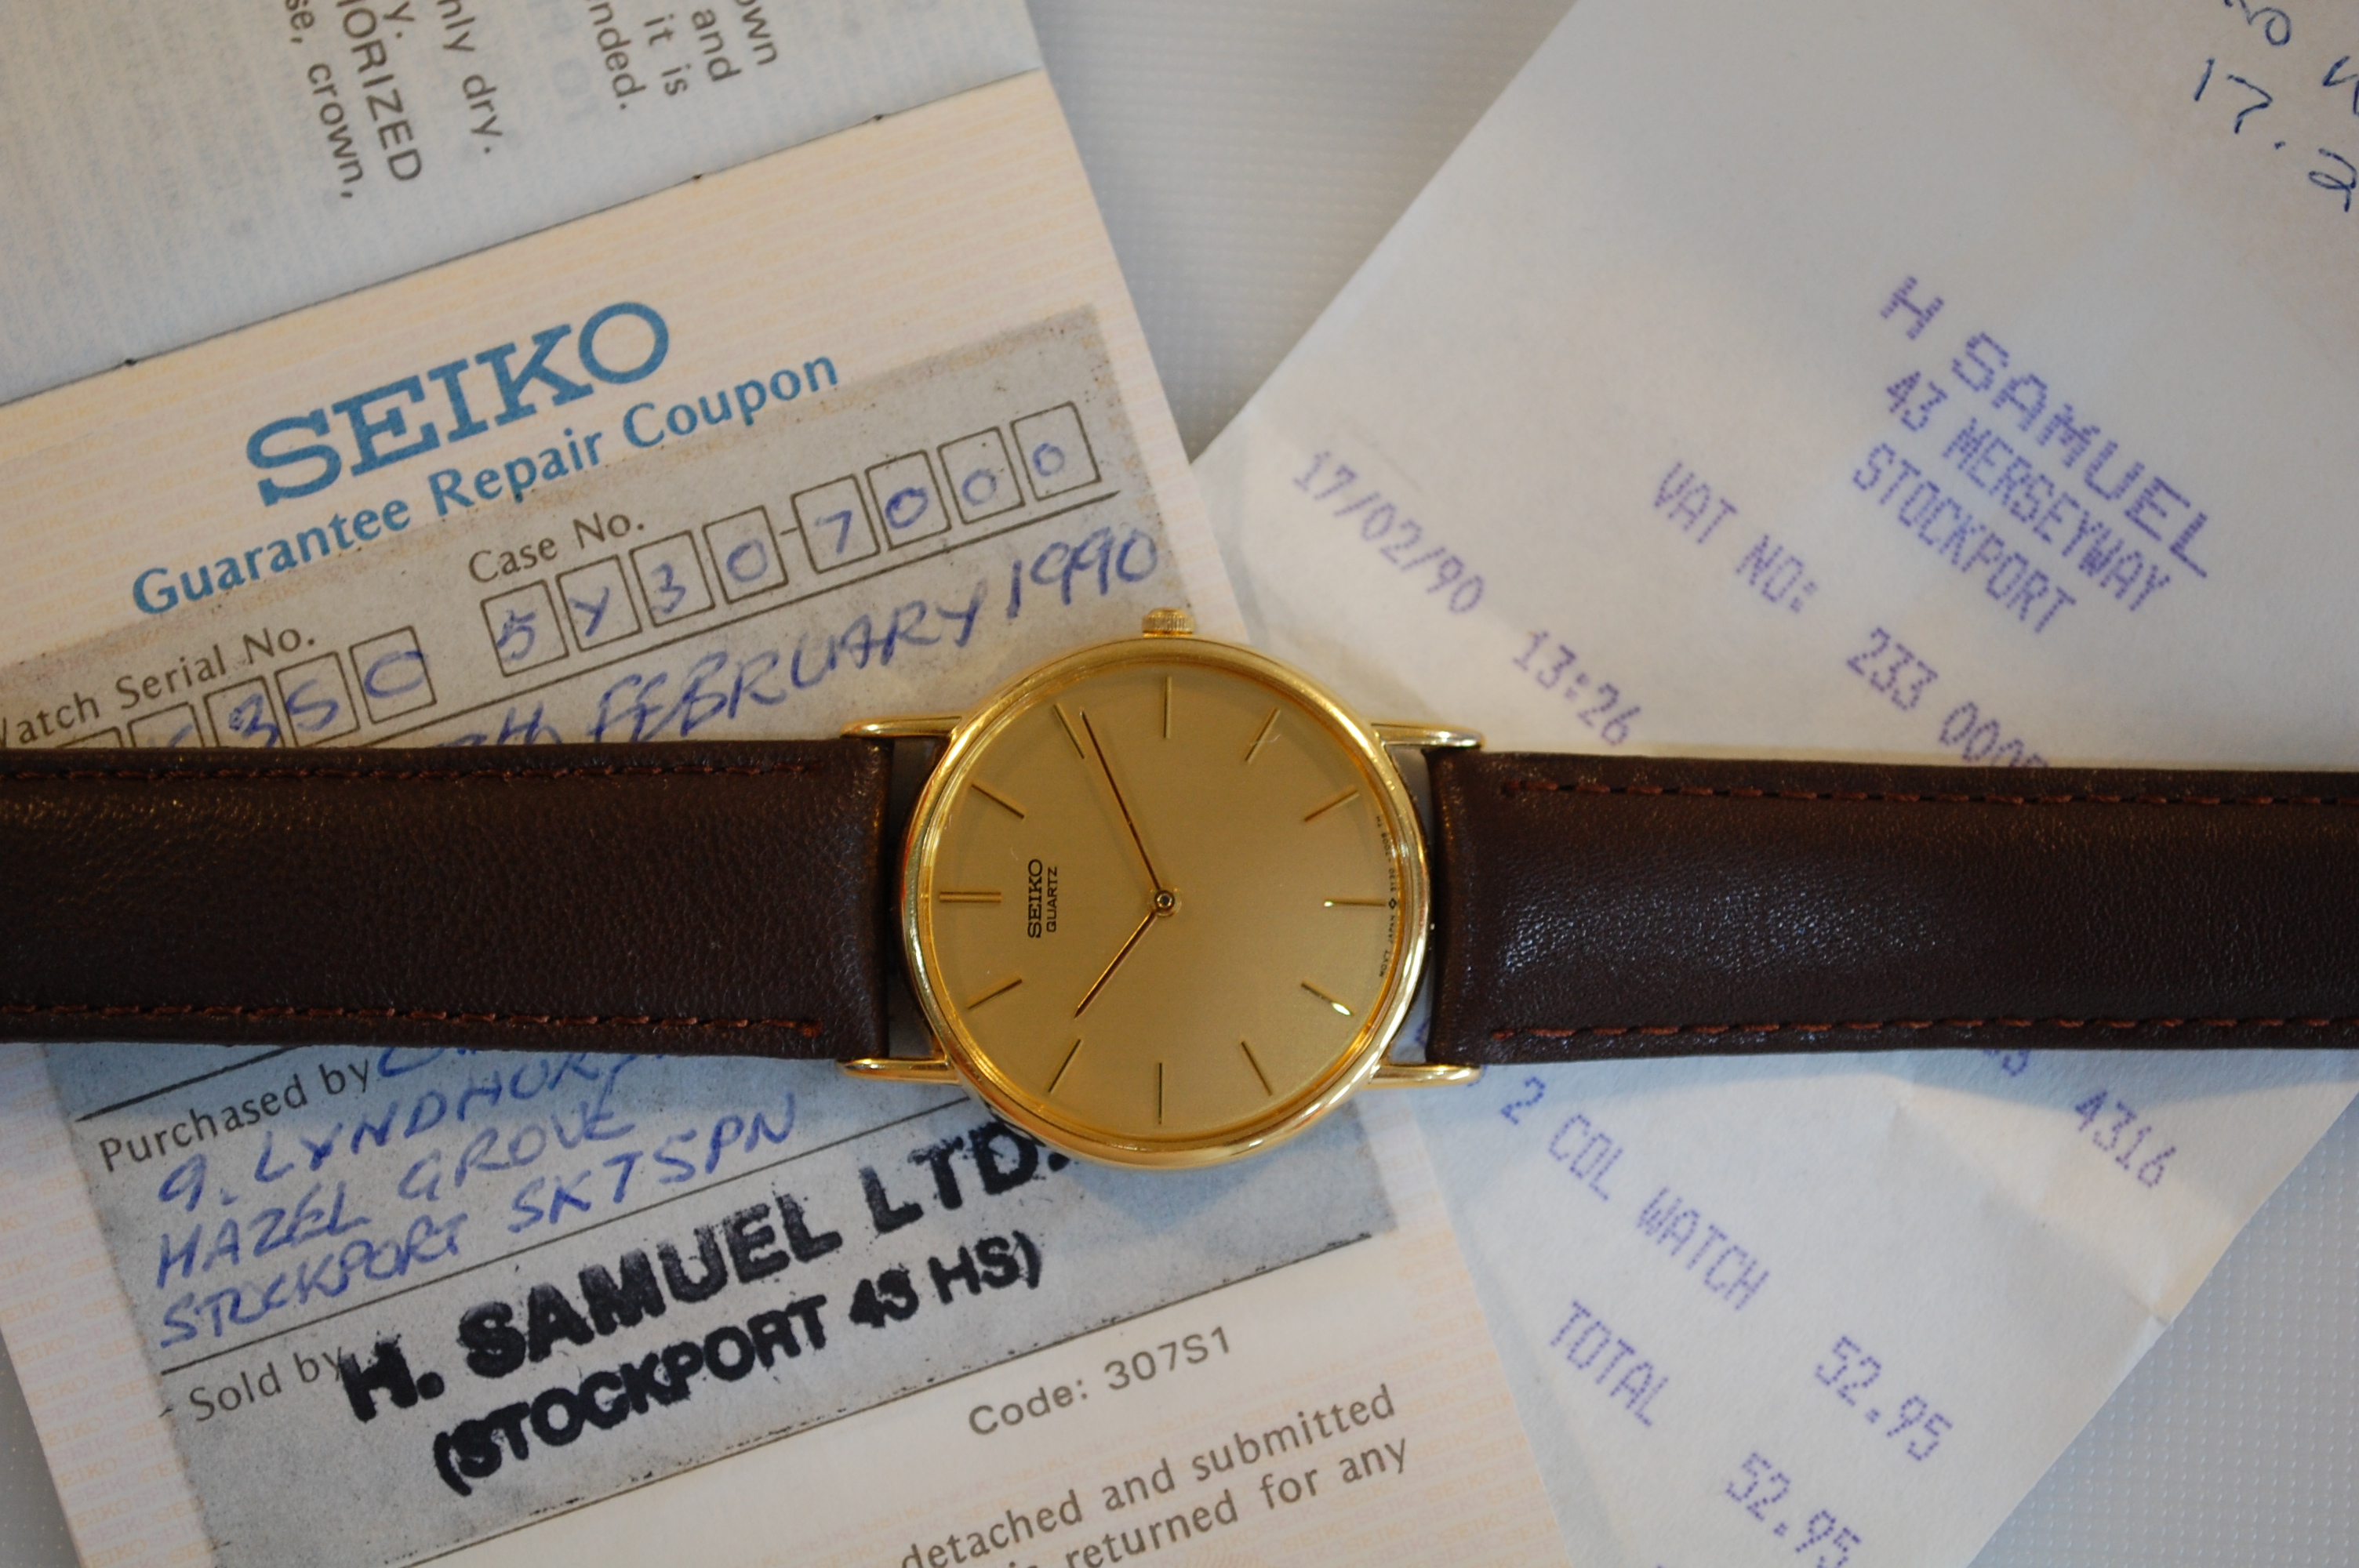 SOLD 1989 1990 Seiko men's watch with box and papers - Birth Year Watches